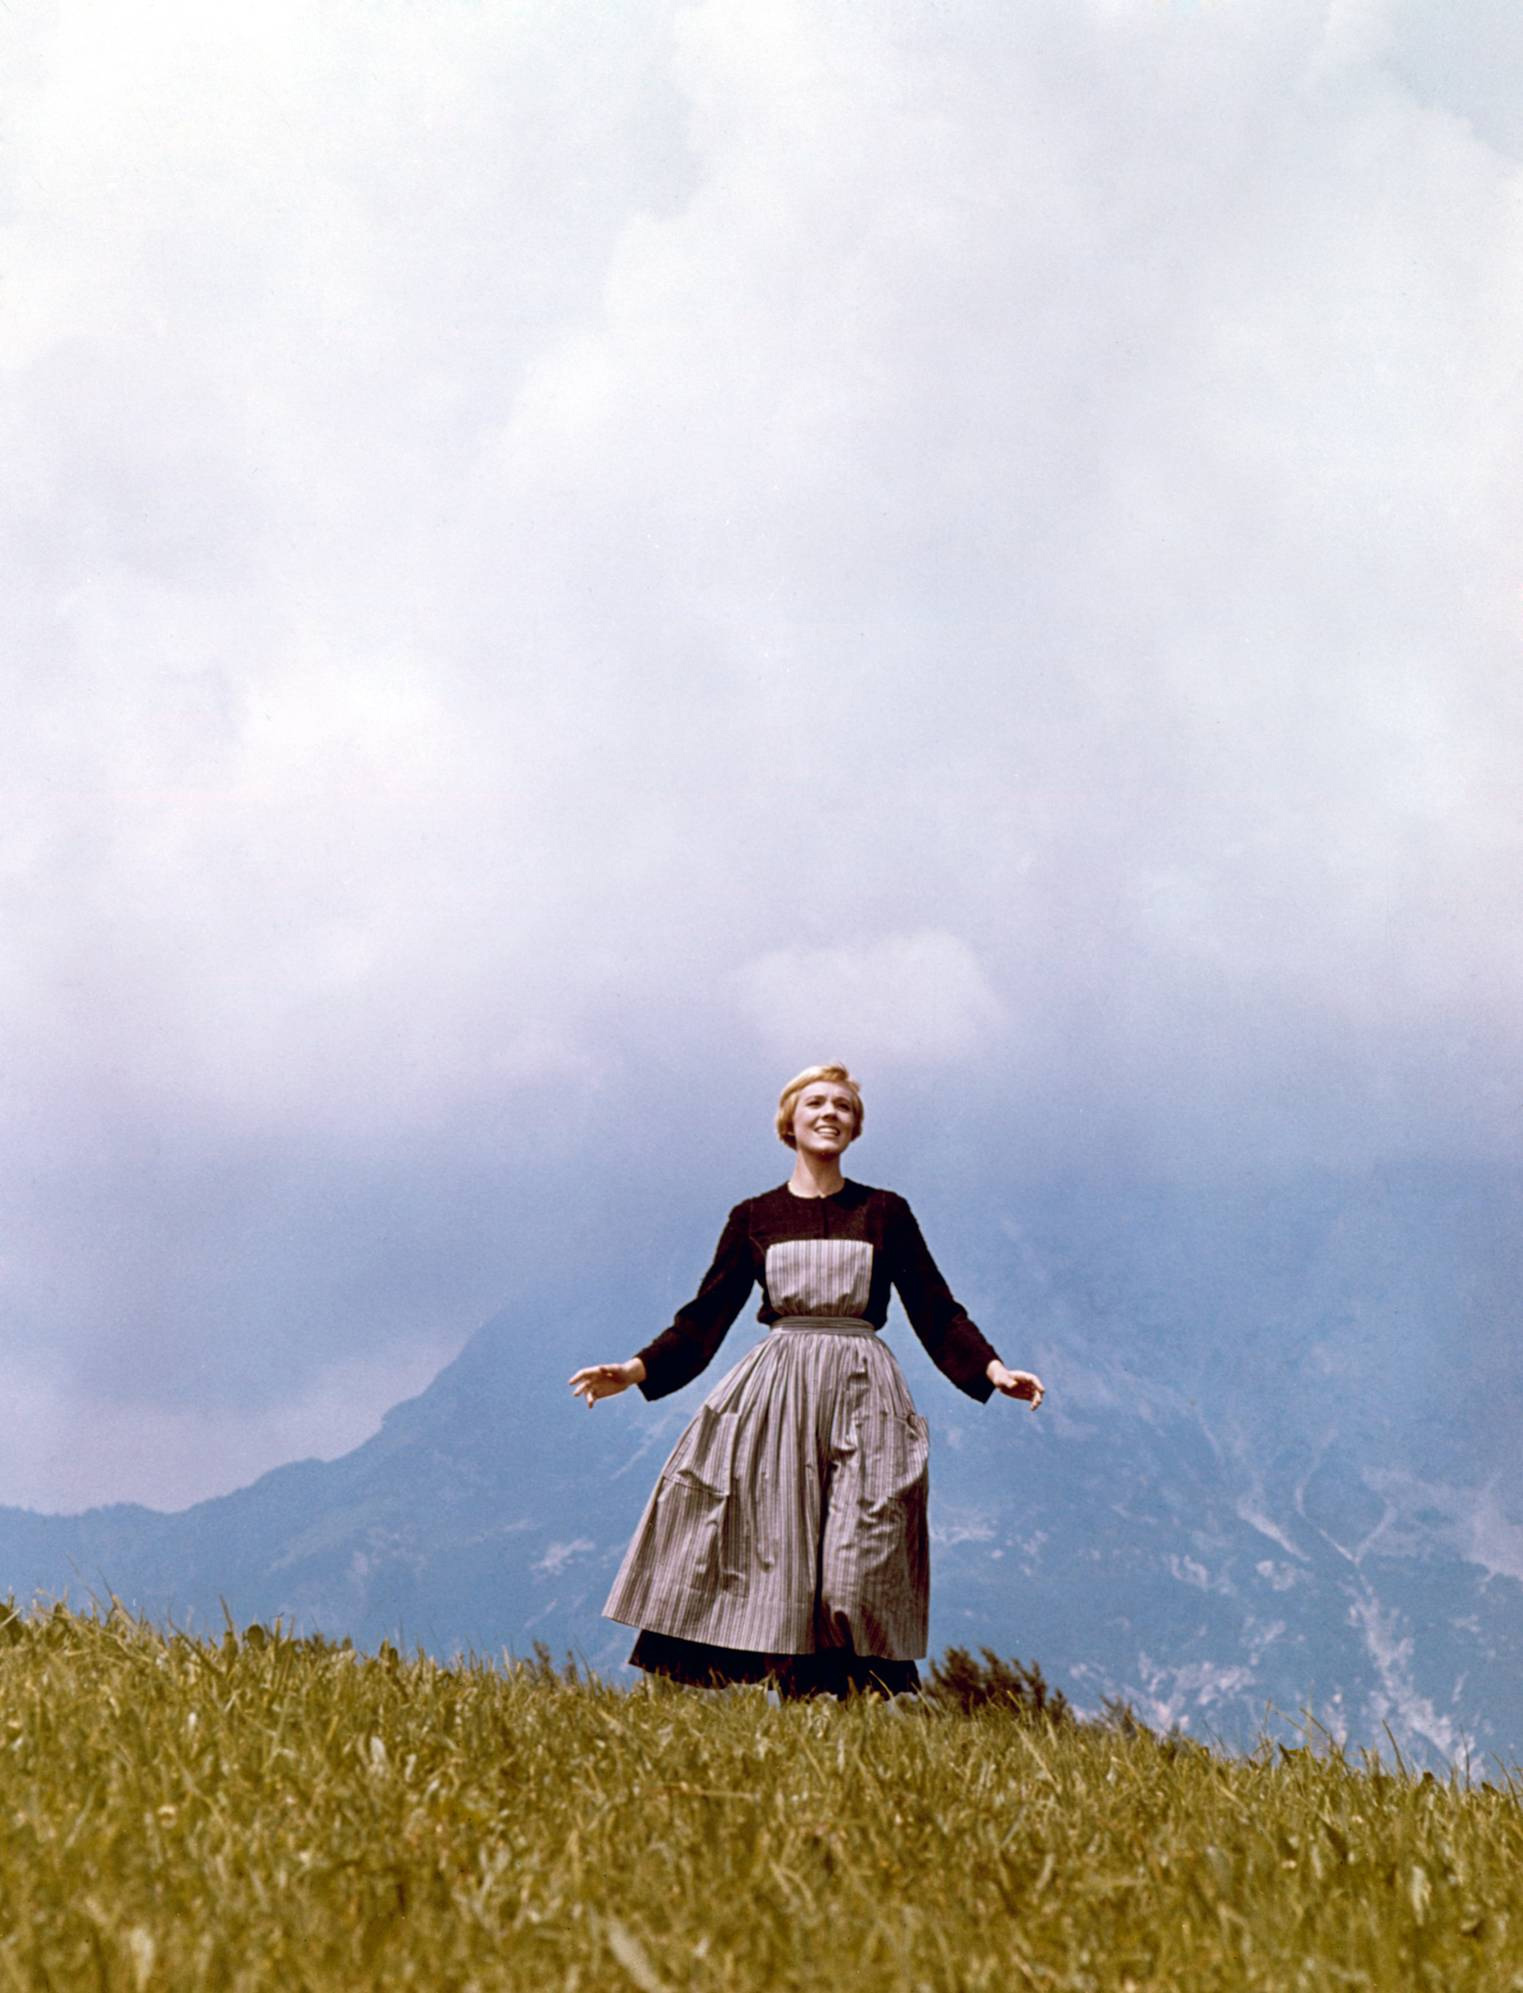 The Sound Of Music Wallpaper Image Group